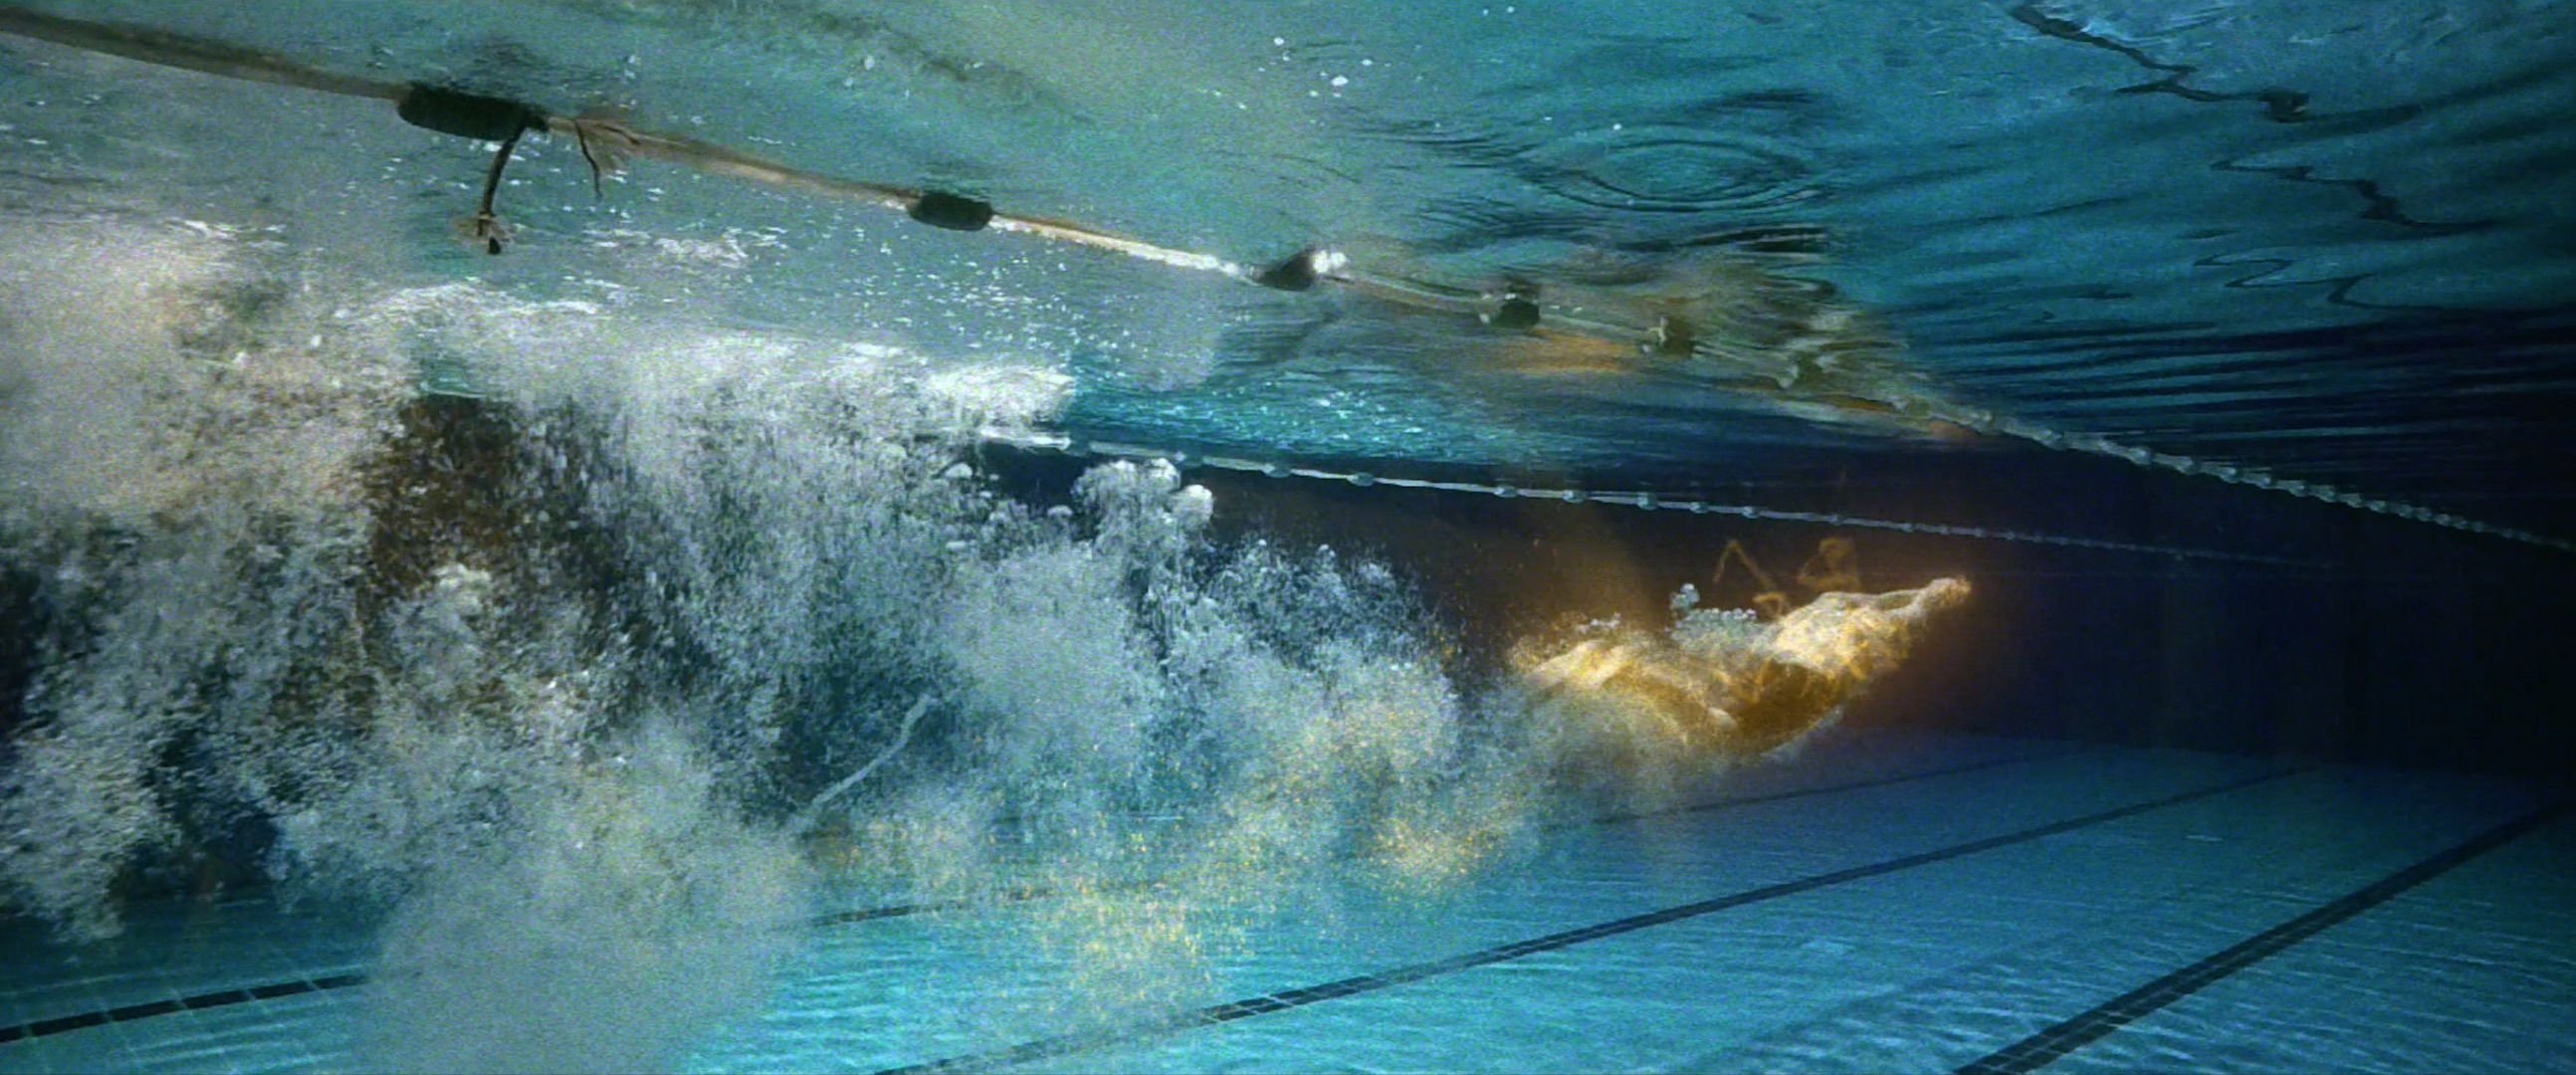 a highlighted swimmer diving into a swimming pool